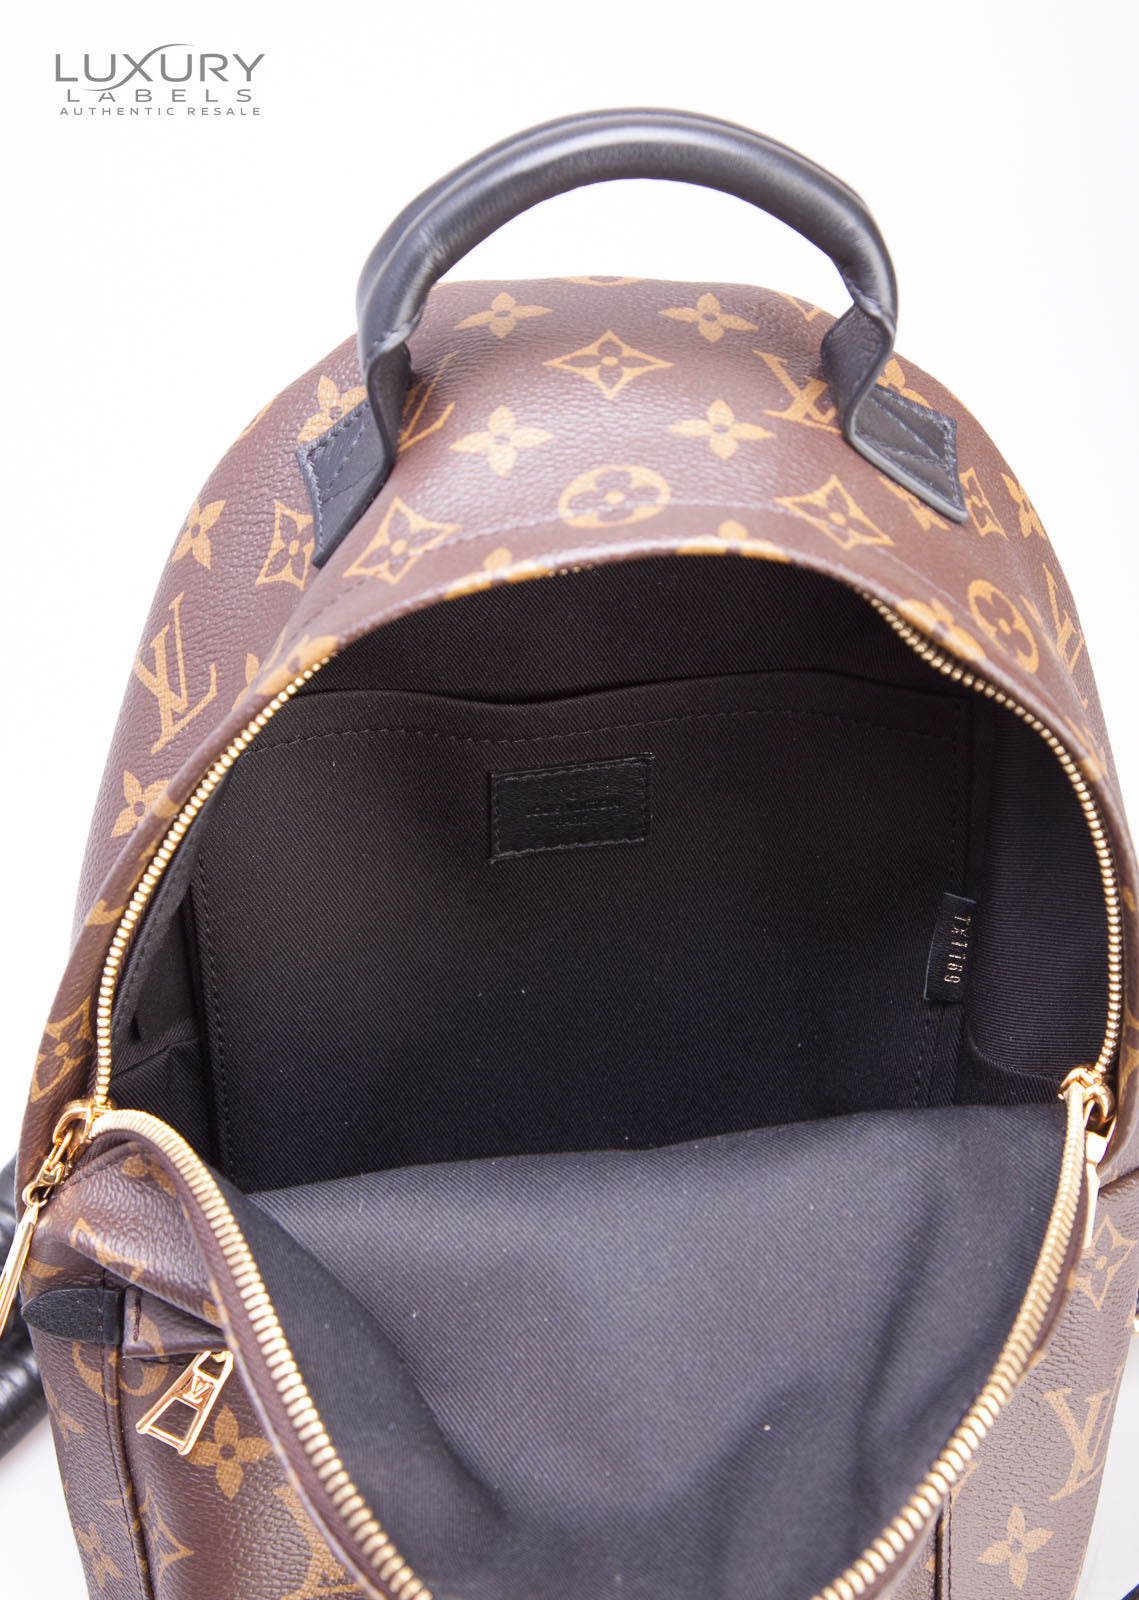 Louis Vuitton Palm spring back pack - AWL2373 – LuxuryPromise